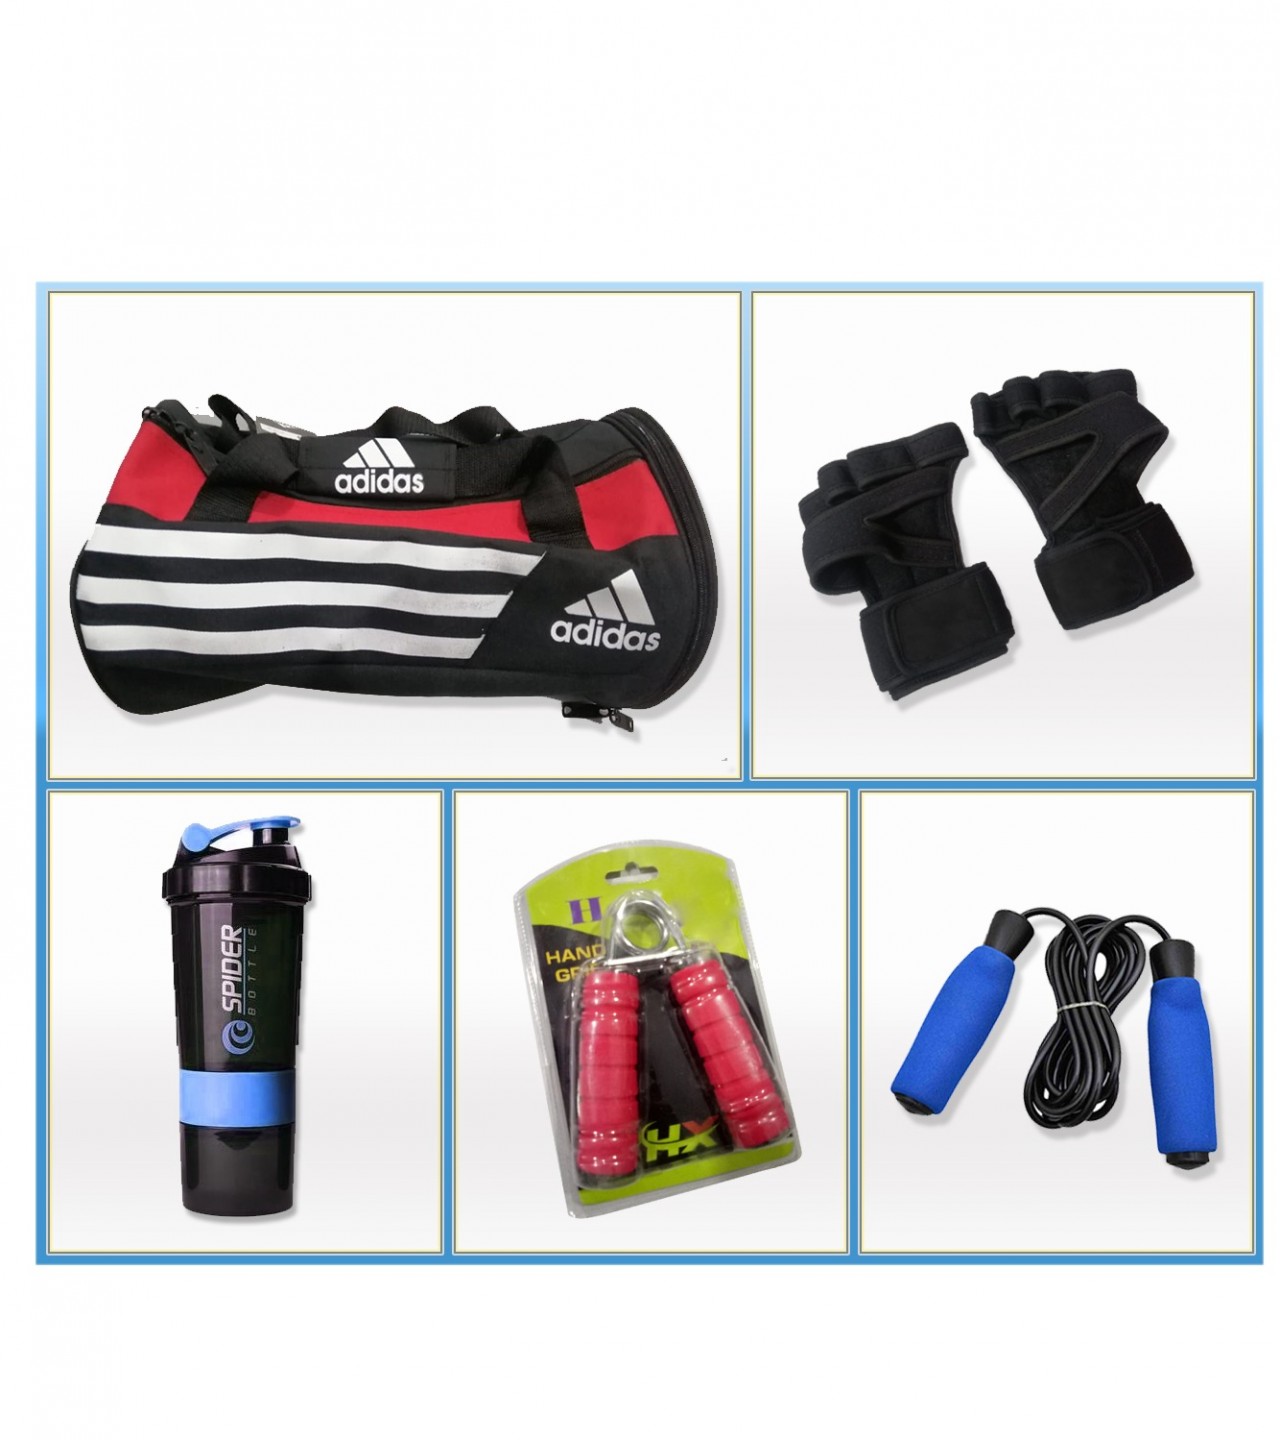 Gym Bag + Gym Gloves + Sports Shaker + Hand Grip +  Jumping Rope - Complete Fitness Set